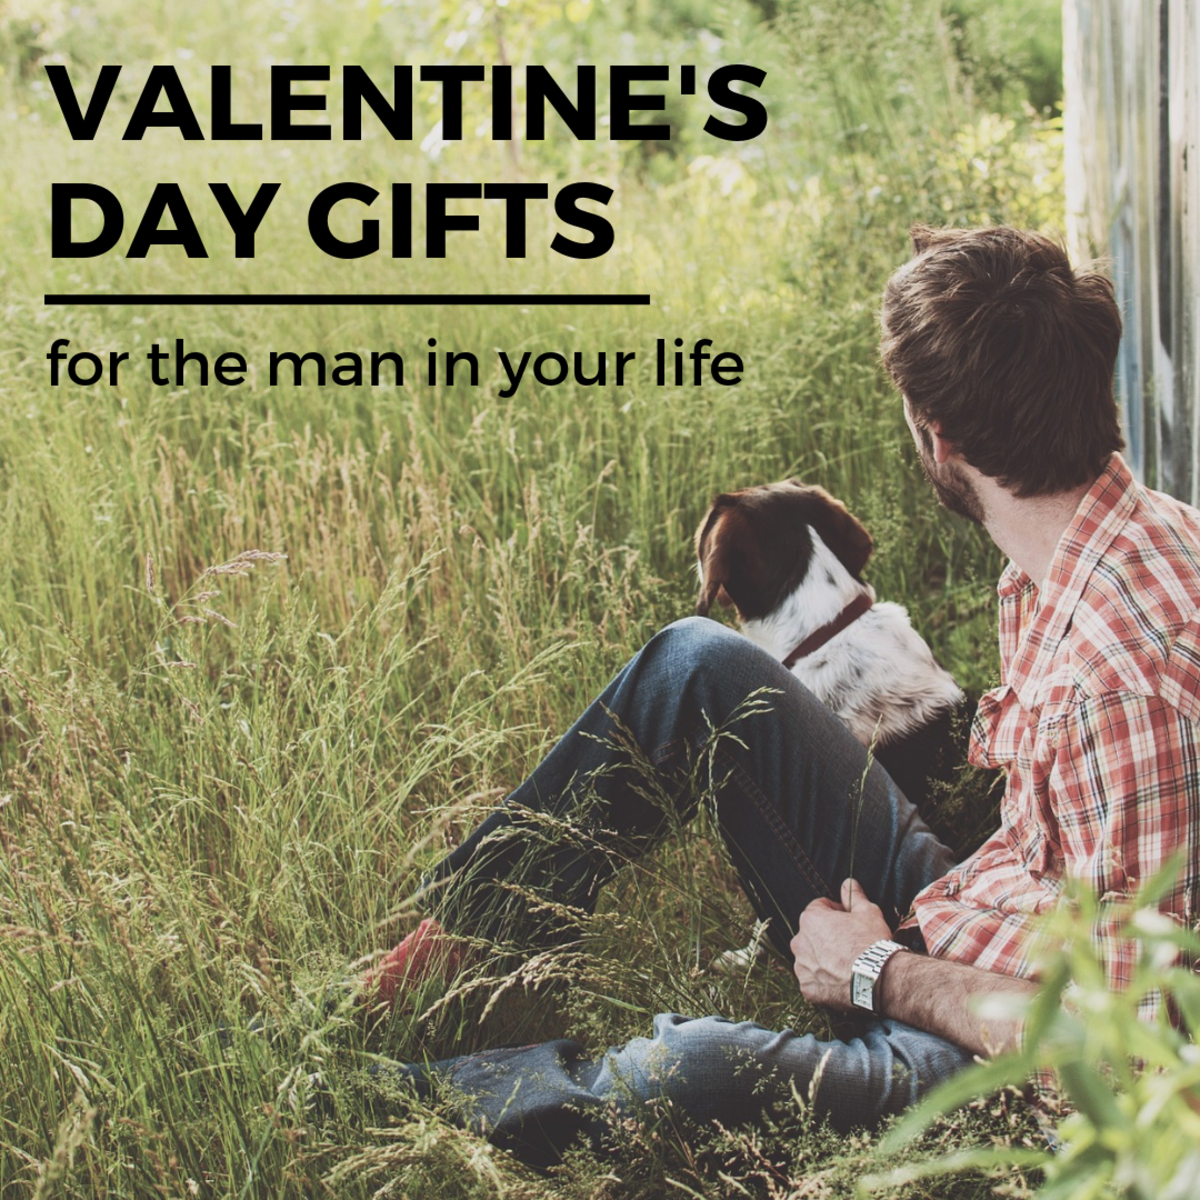 How to Choose Valentine's Day Gifts for Men